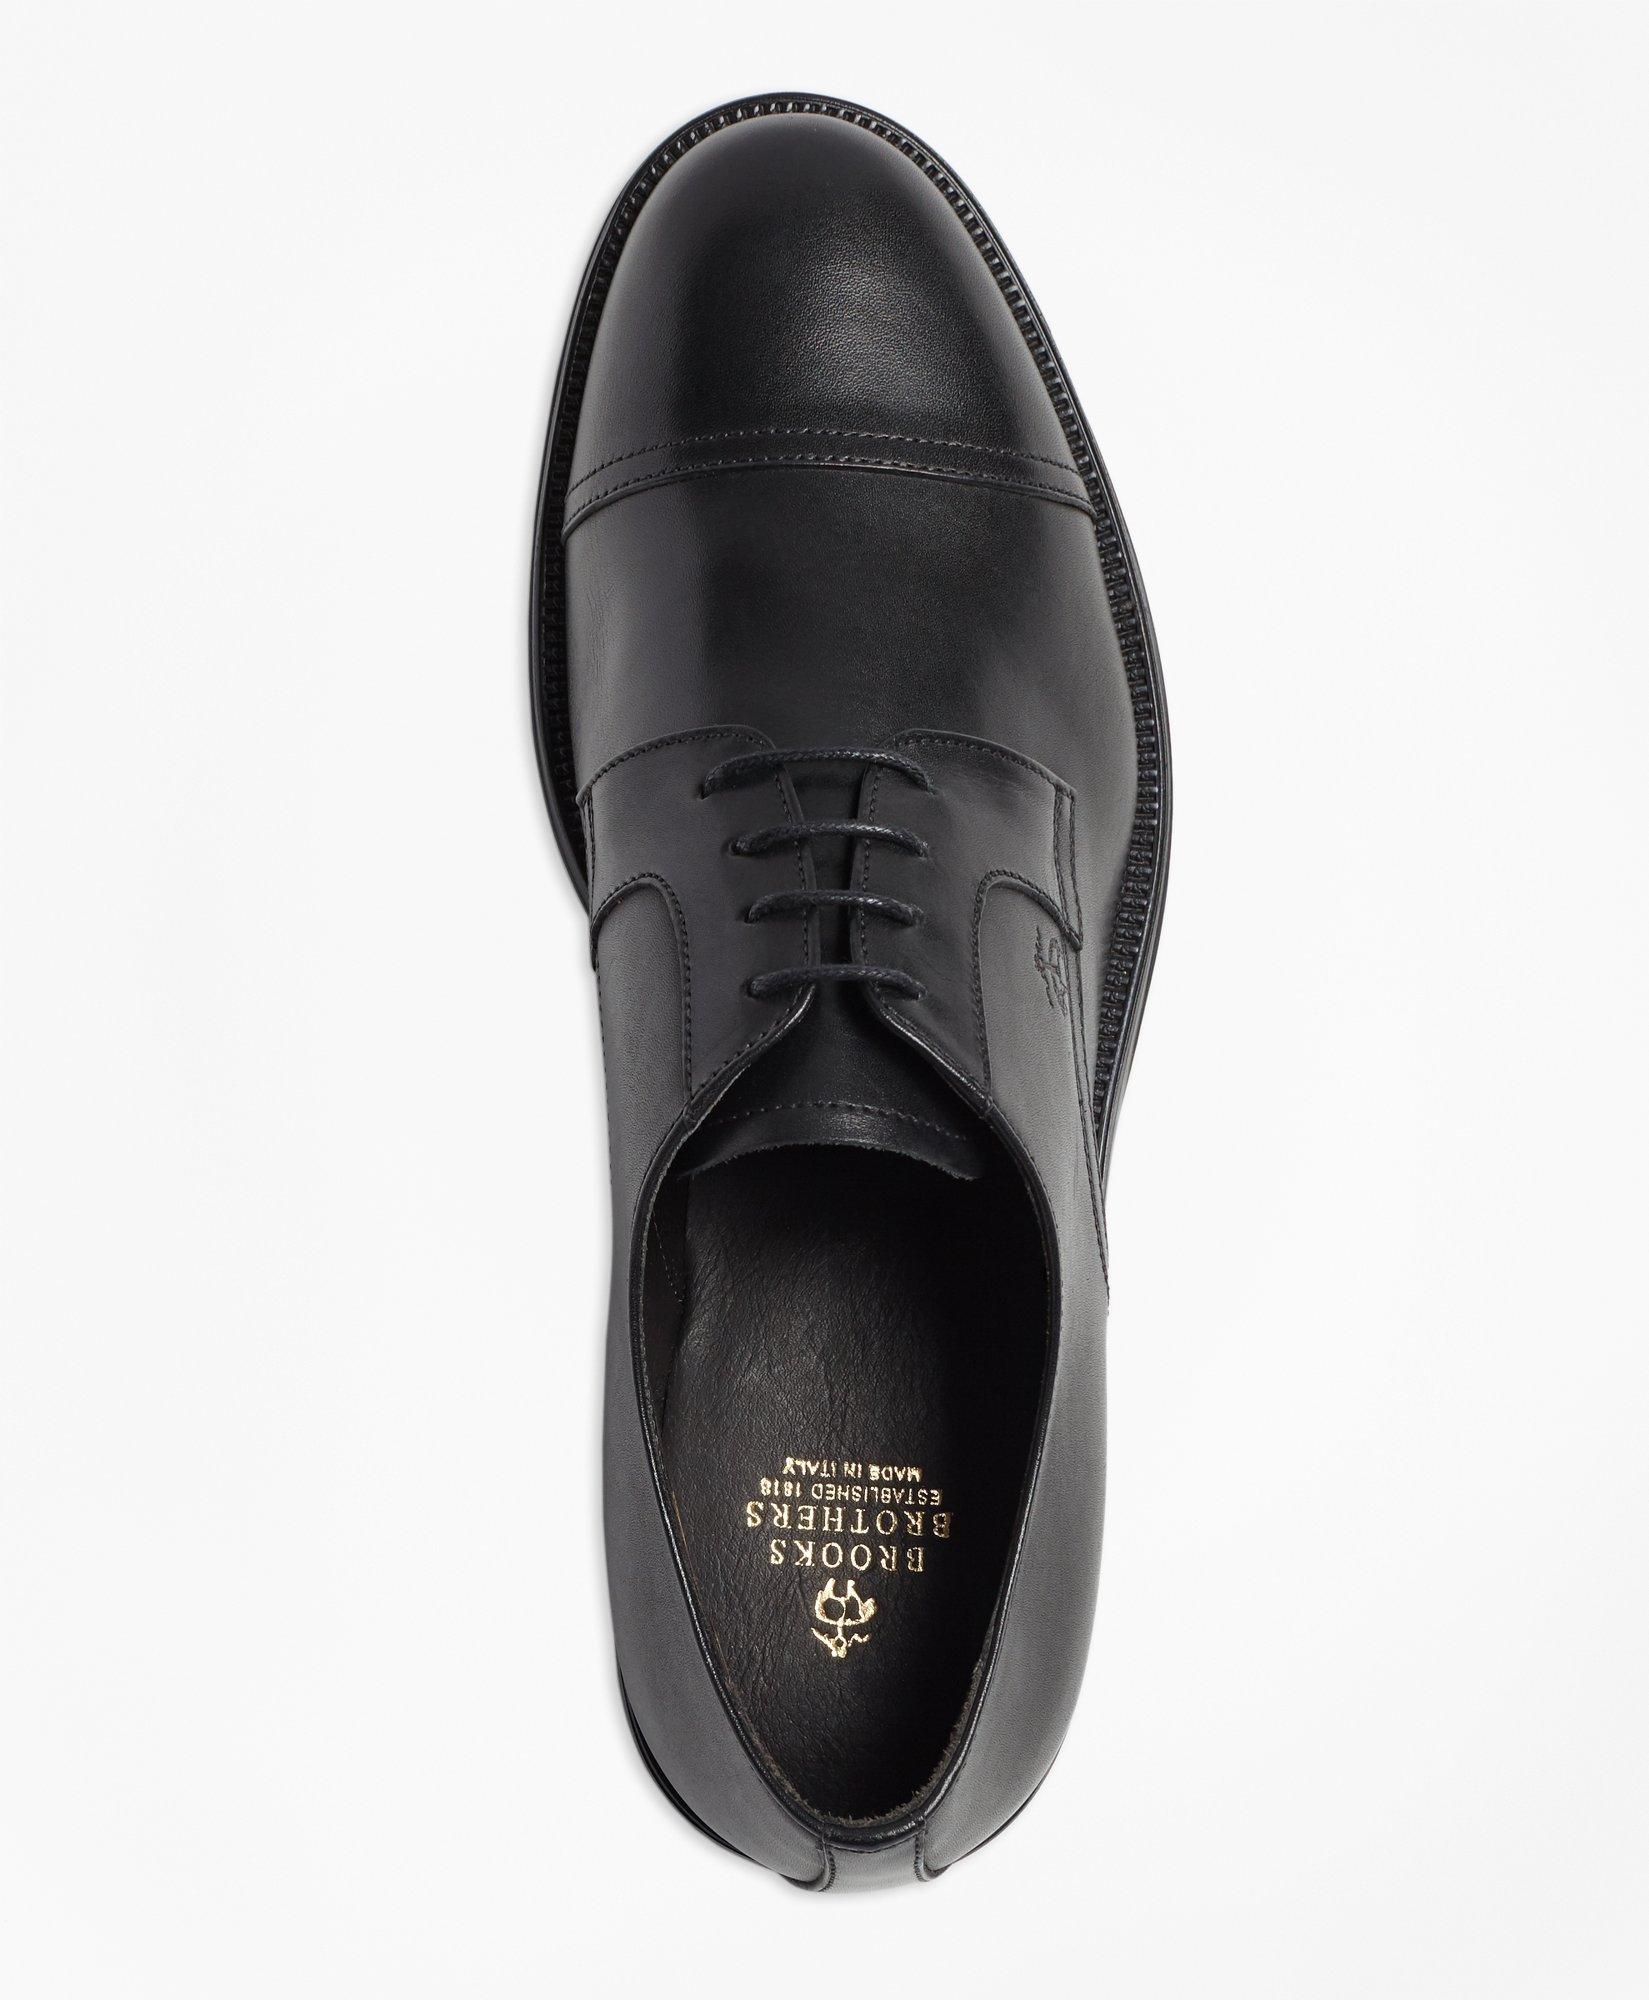 How to Find Size on Brooks Brothers Shoe?